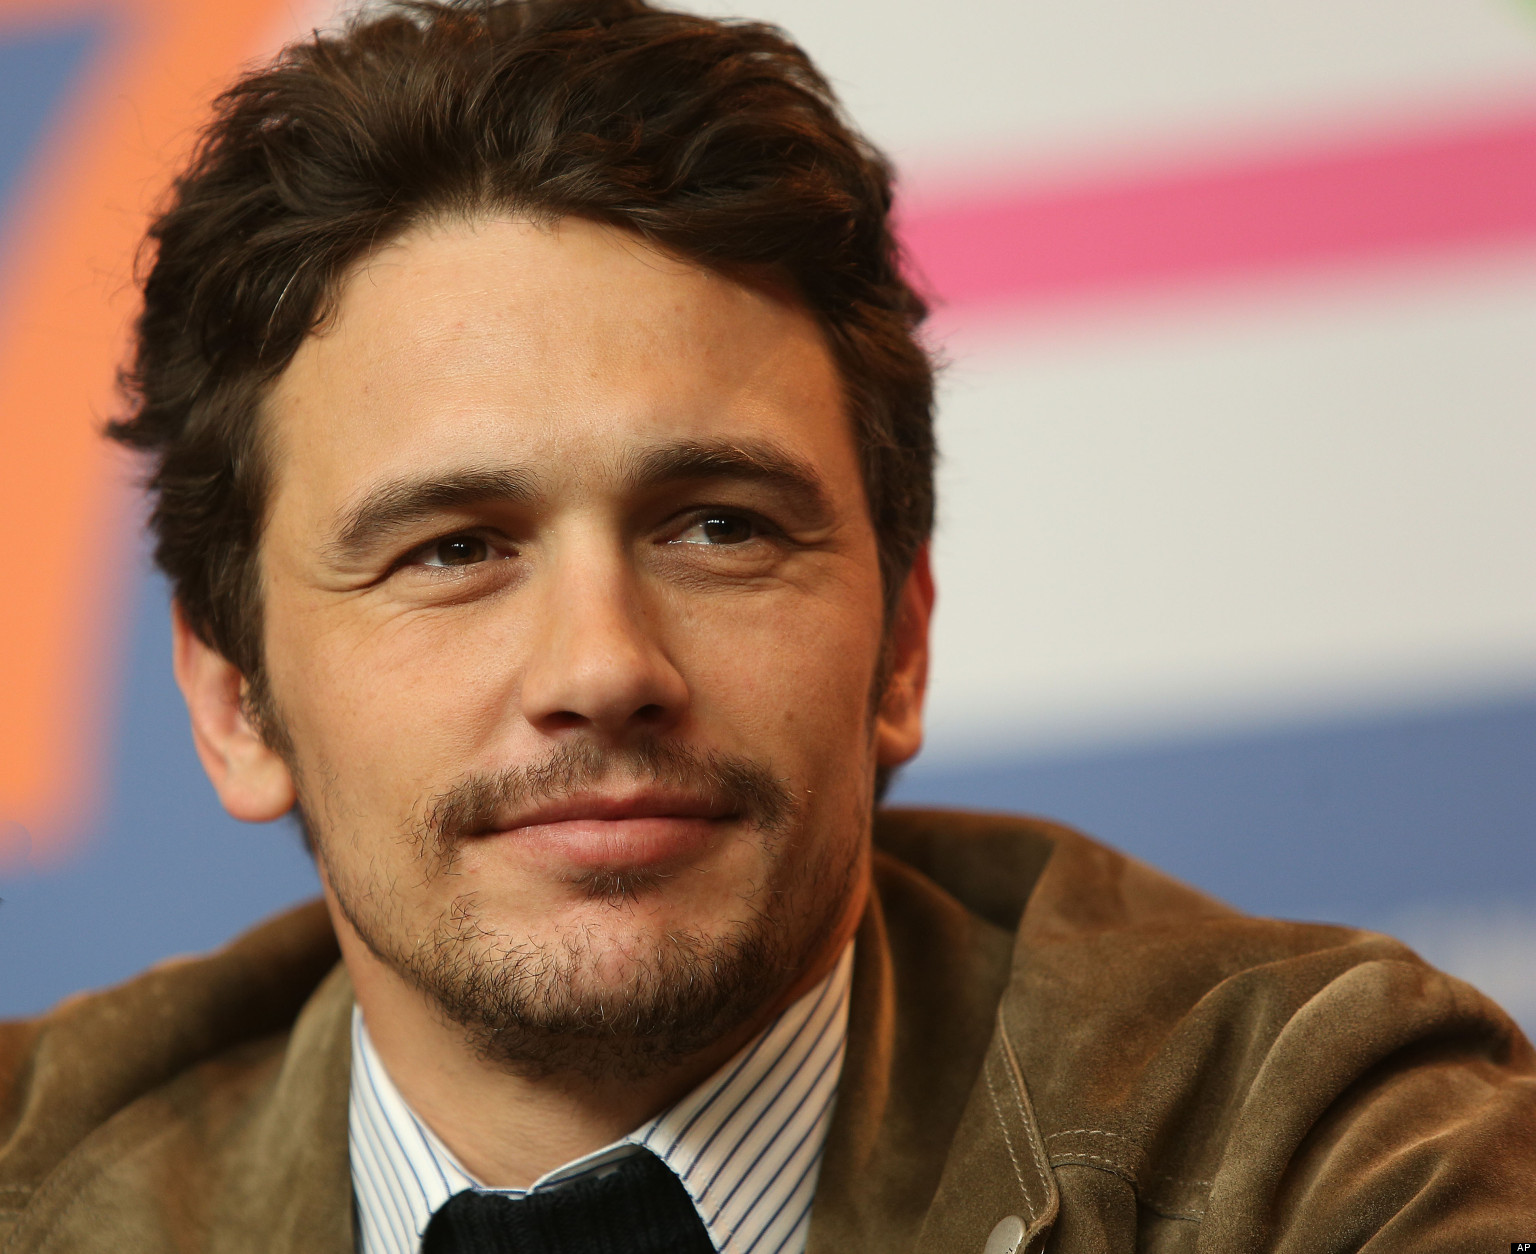 James Franco On 'Spring Breakers': Actor Says He's A 'Natural' At ...